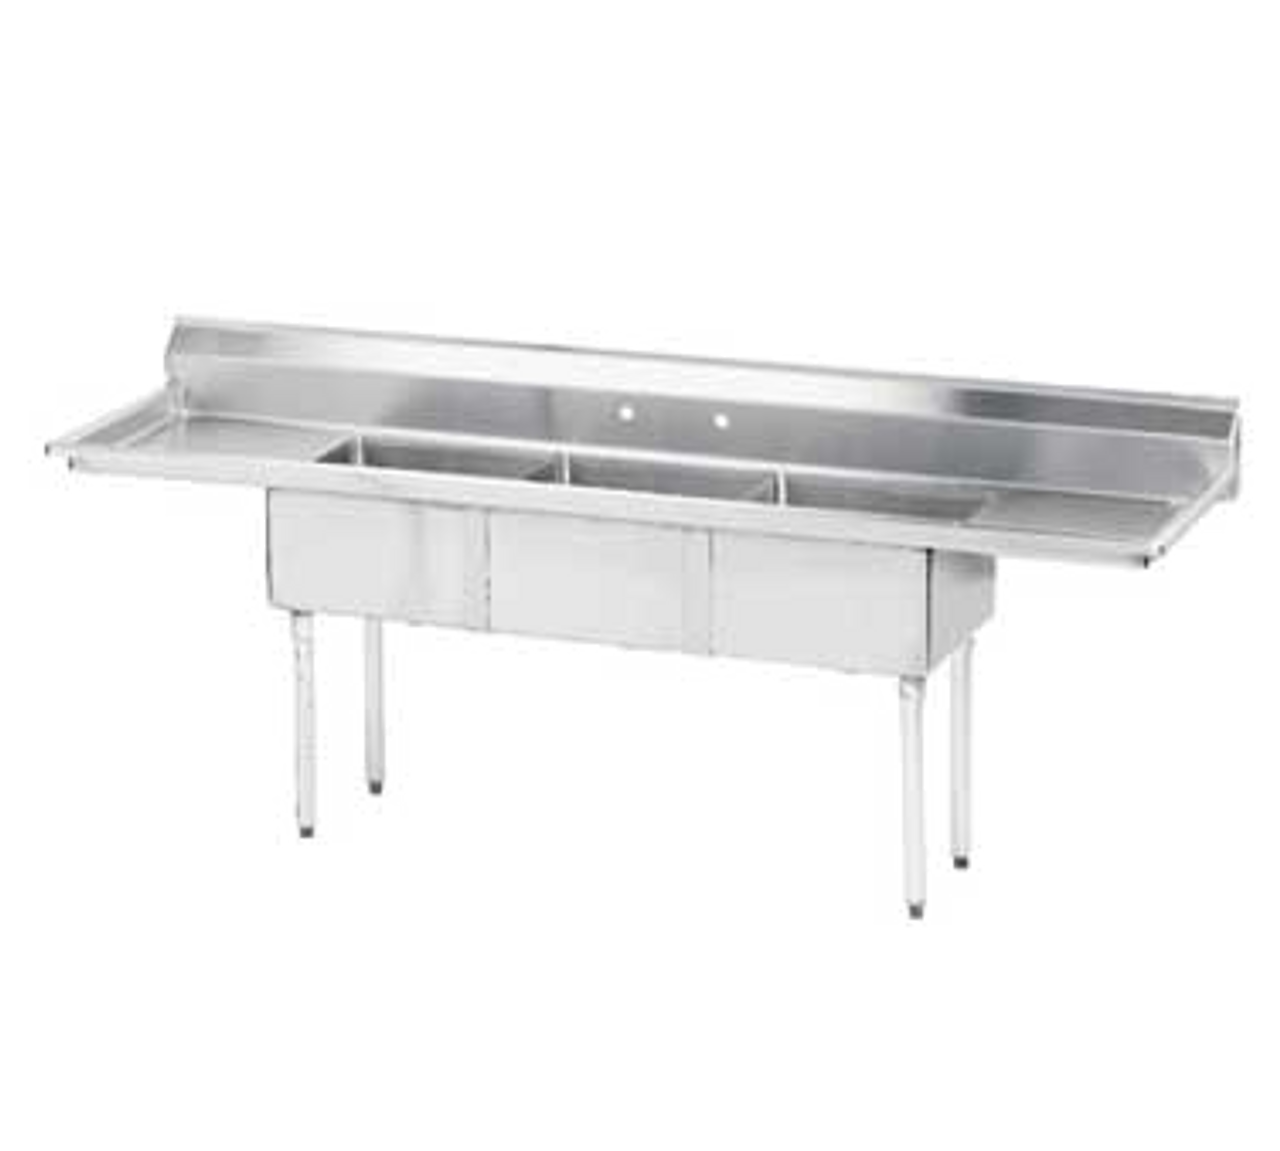 Special Value Fabricated Sink, 3-compartment, 18" right & left drainboards, bowl size 16" x 20" x 12" deep, 18 gauge 304 stainless steel, tile edge splash, rolled edge, 8" OC faucet holes, galvanized legs with 1" adjustable plastic bullet feet, overall 25-3/4" F/B x 84" L/R, NSF